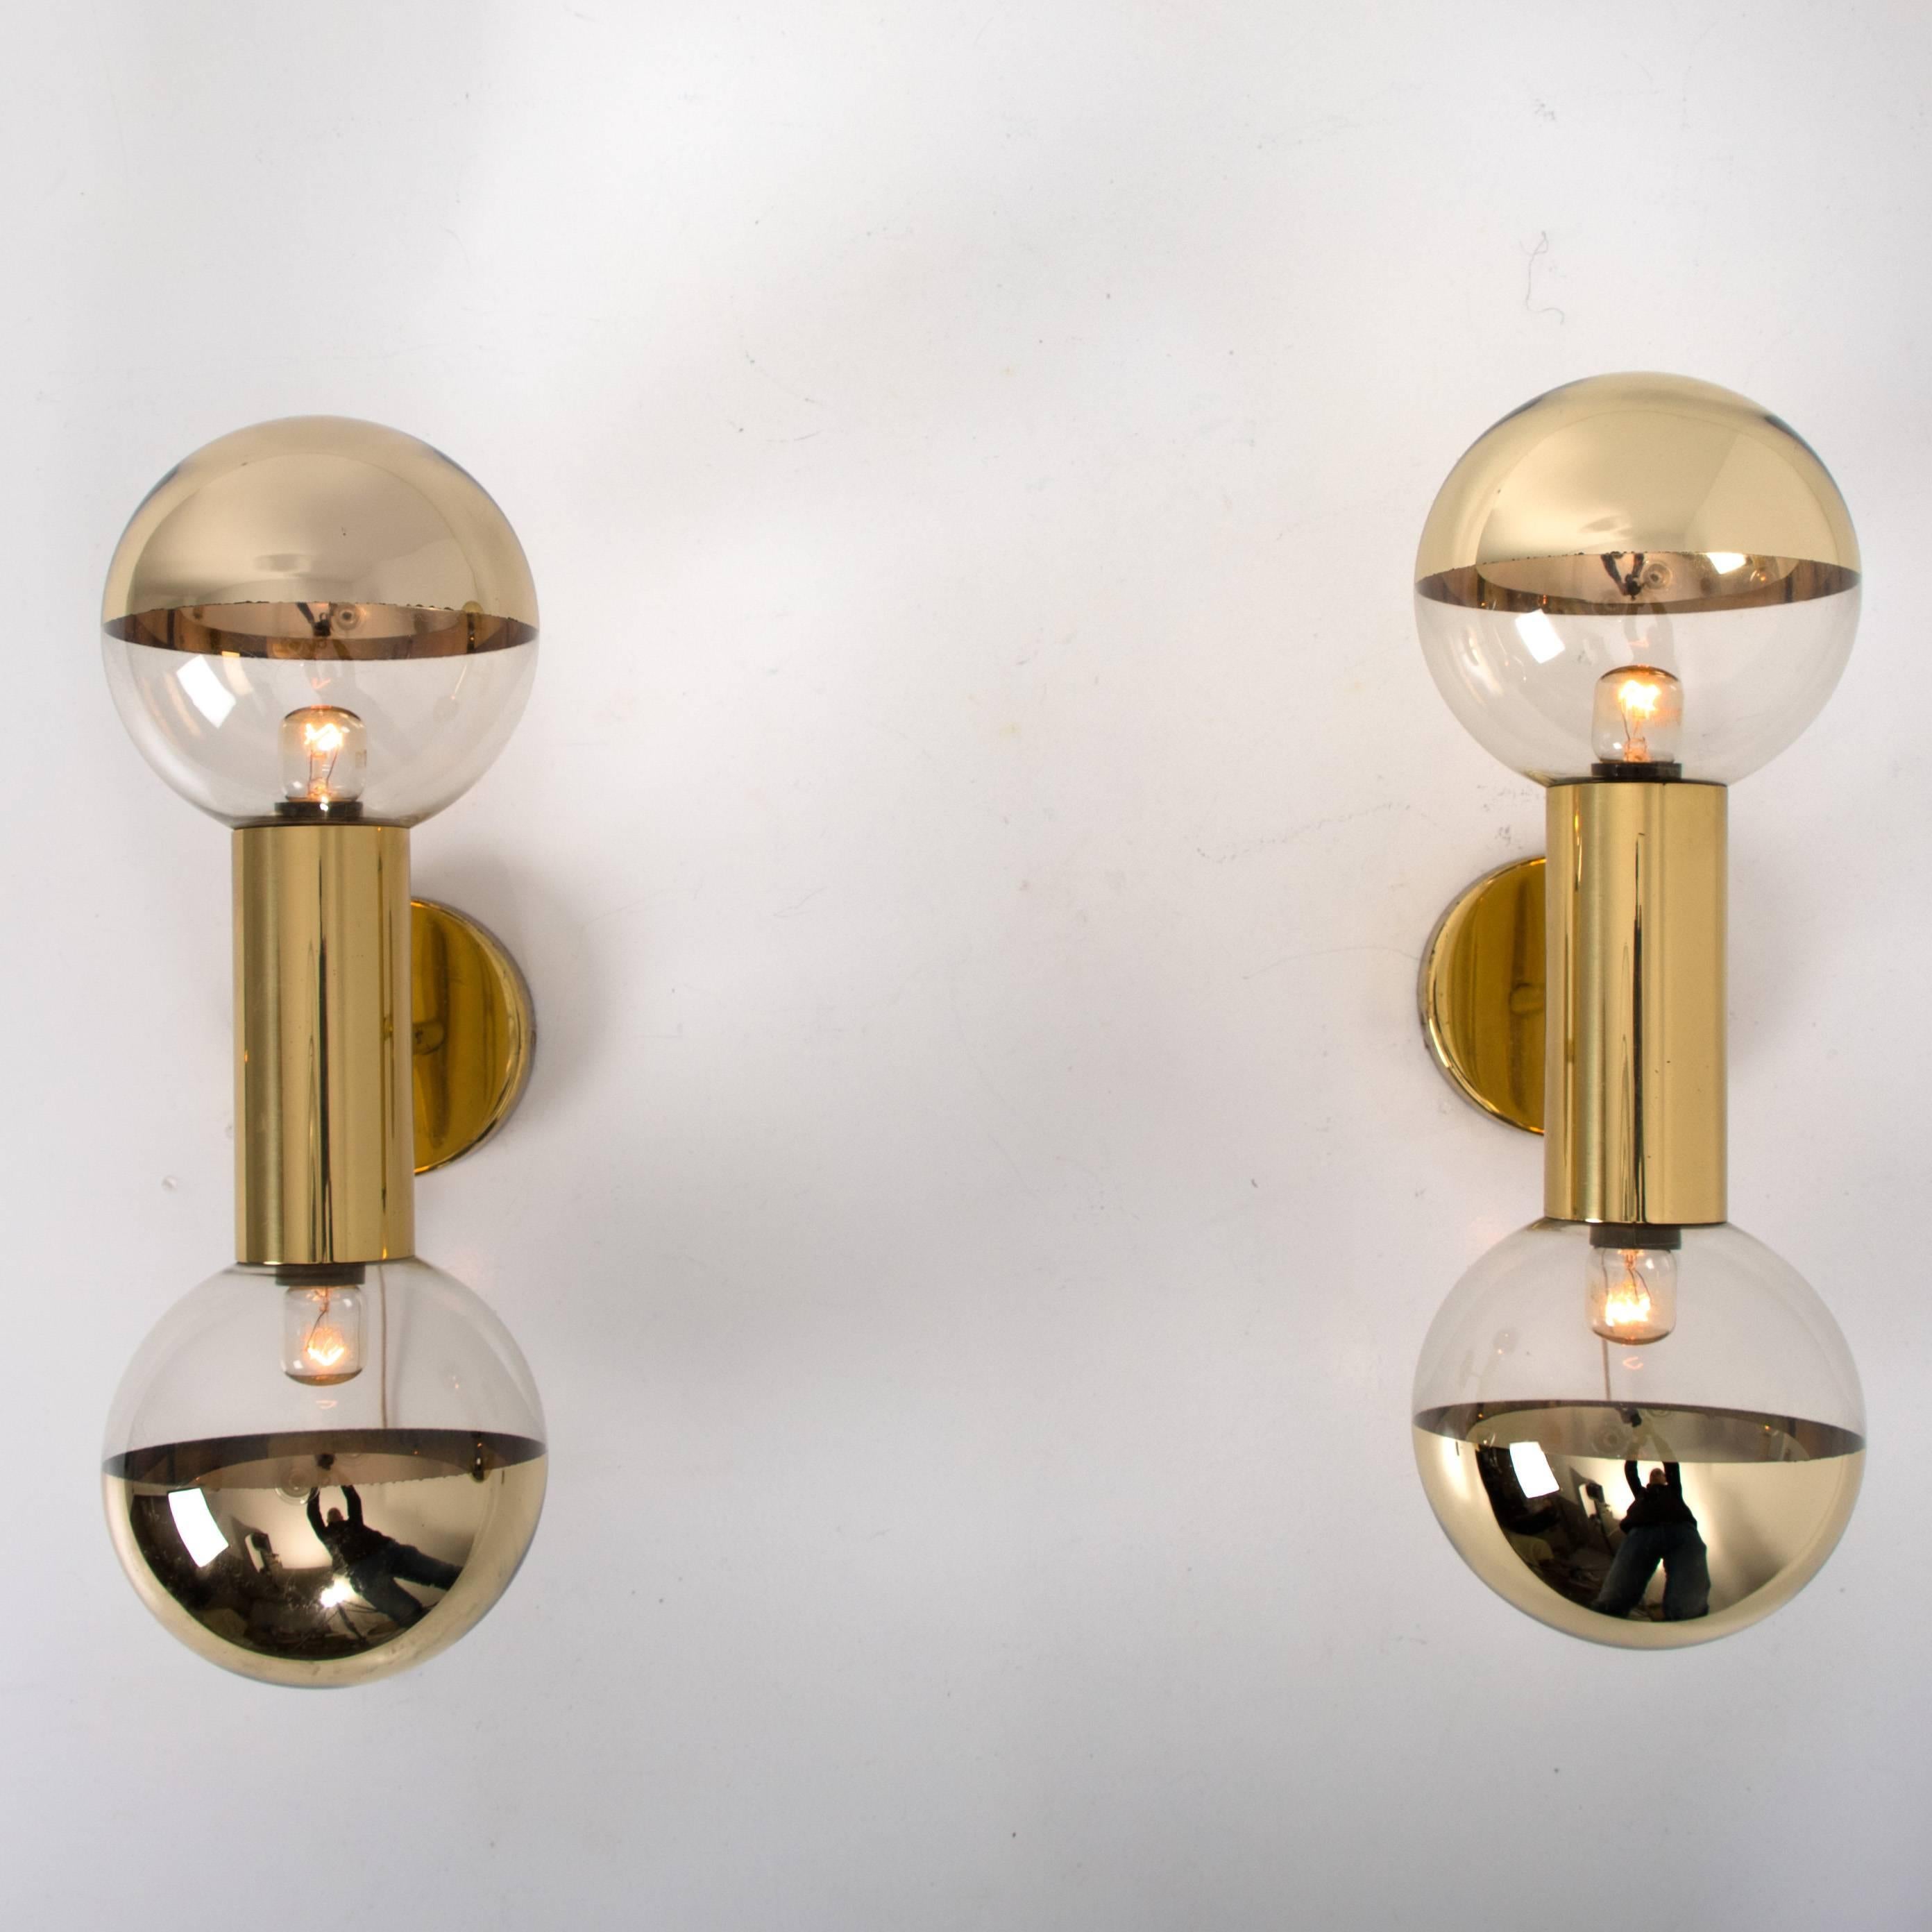 20th Century Pair of Brass Wall Lamps or Wall Scones by Motoko Ishii for Staff, 1970s